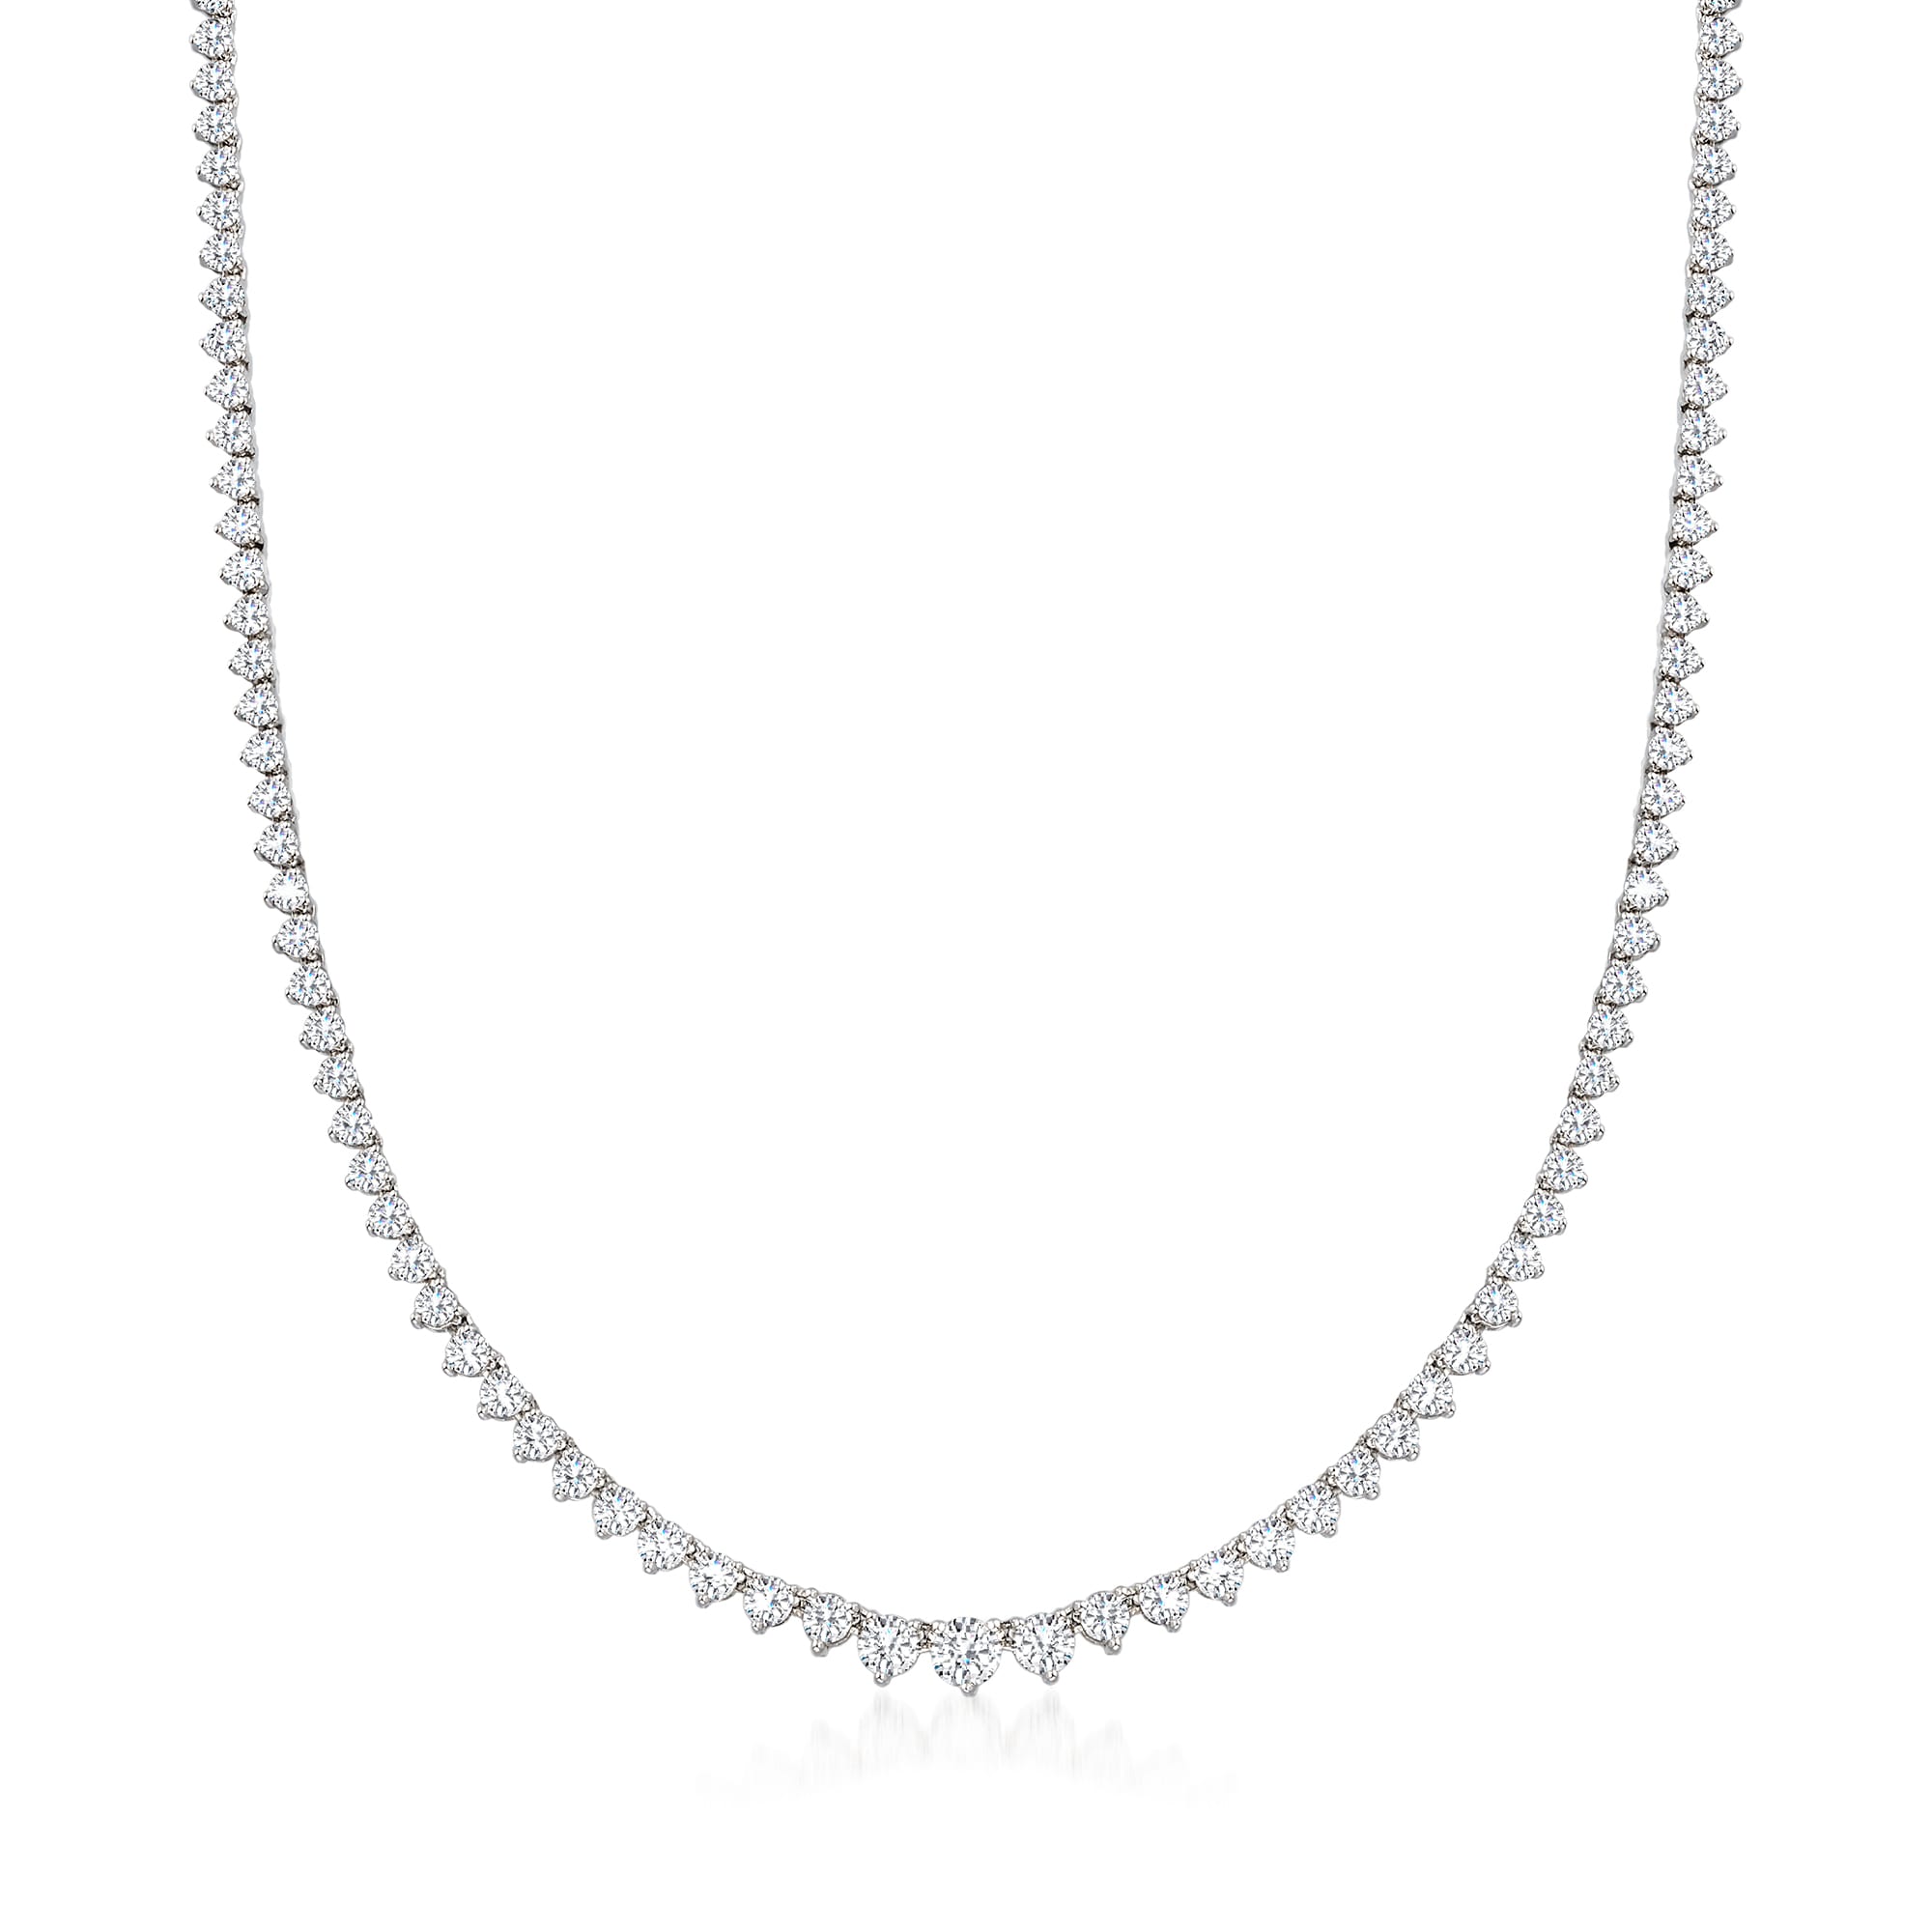 10.00 ct. t.w. Diamond Tennis Necklace in 14kt White Gold. 17